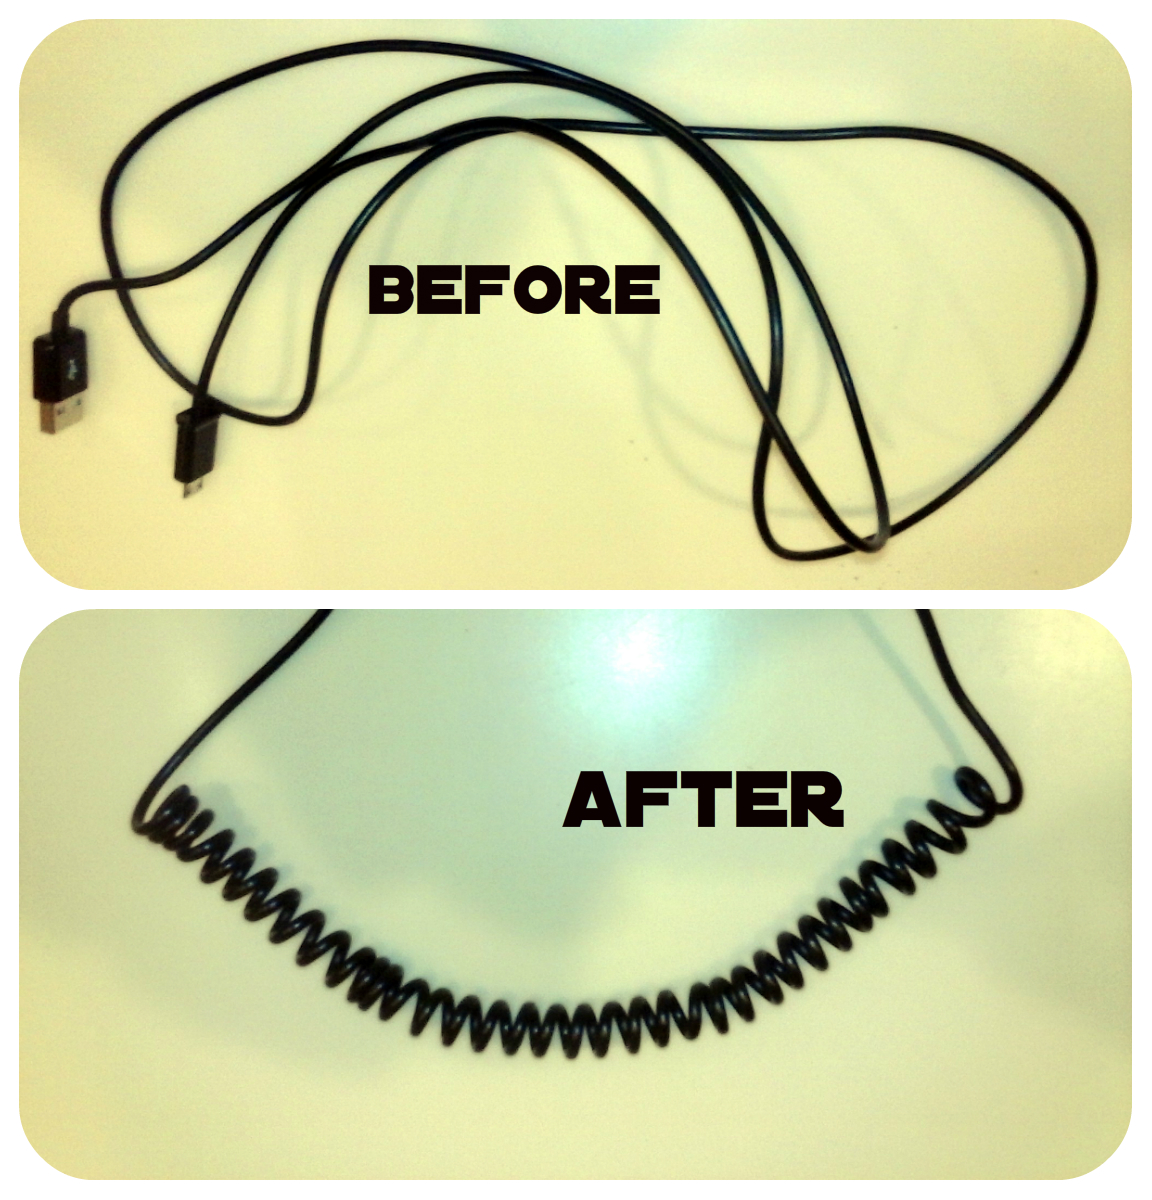 Coiling a USB power cord